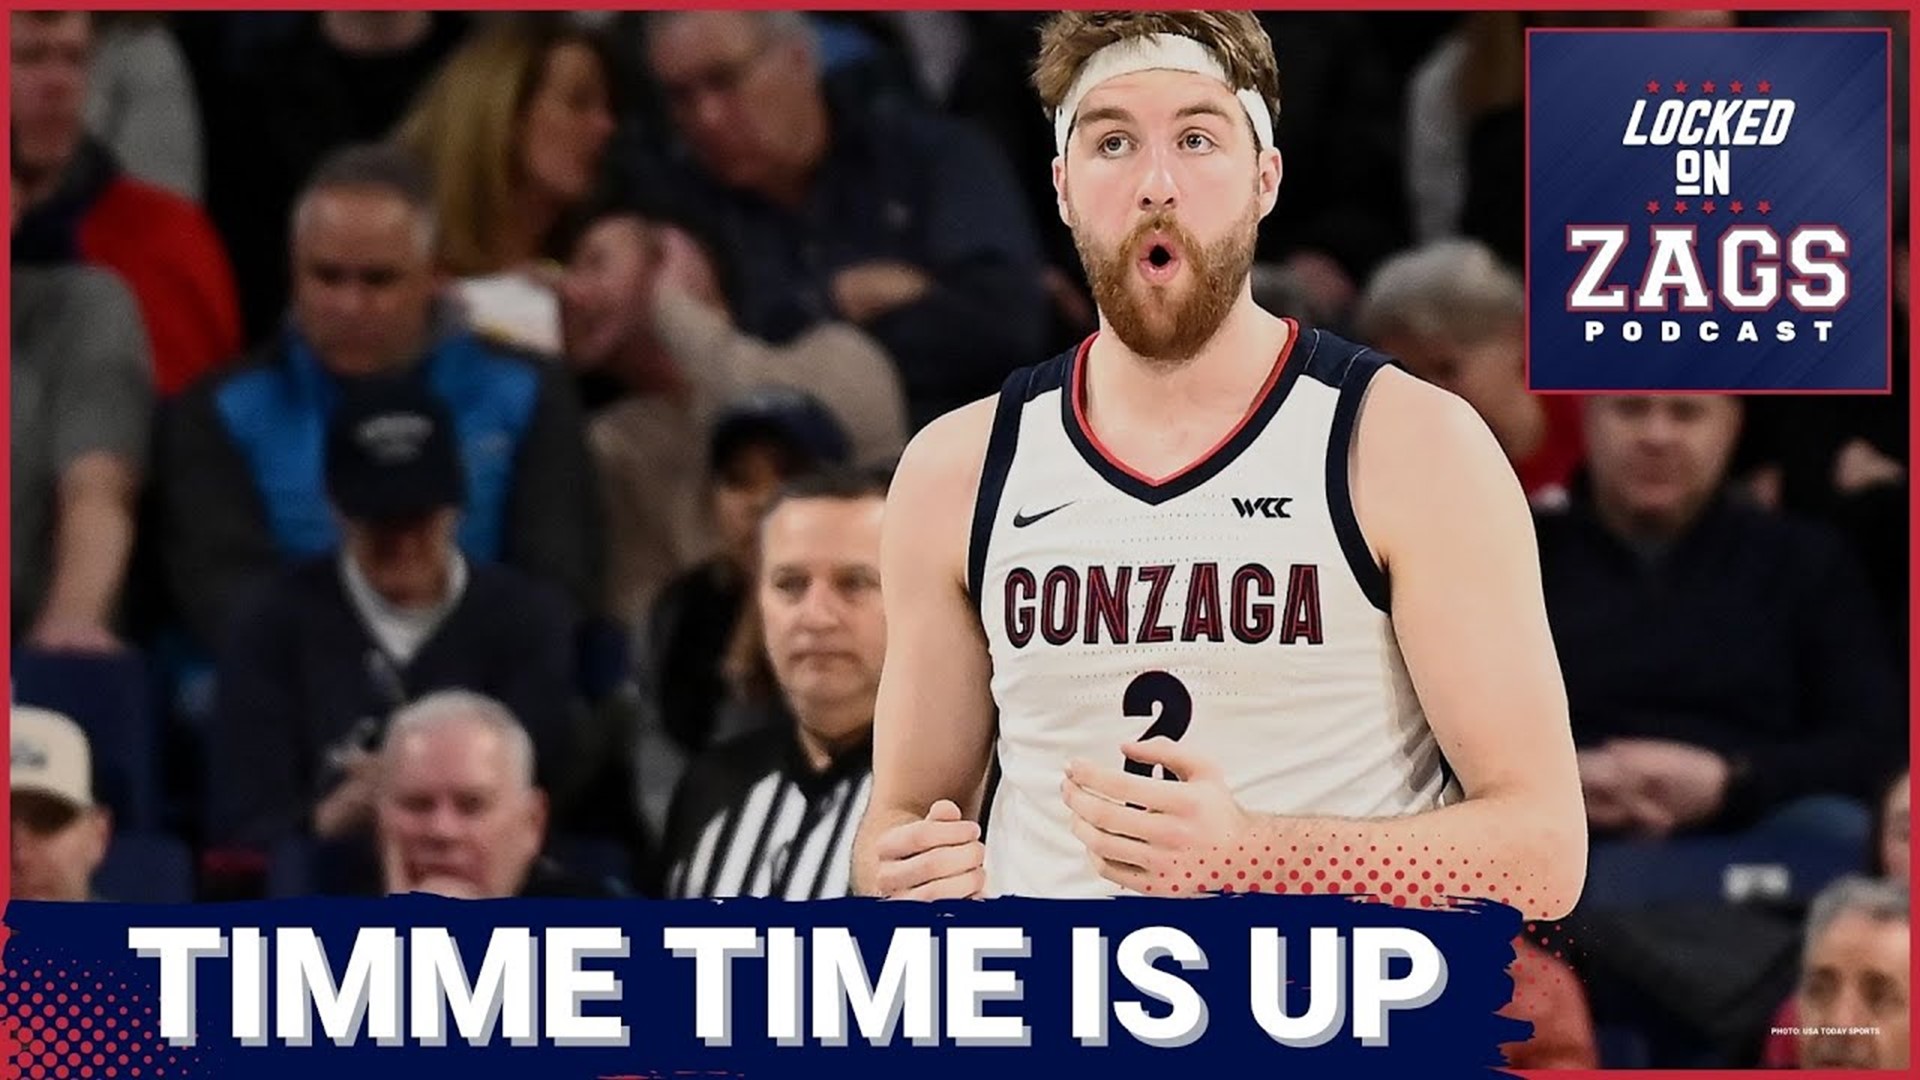 Drew Timme announced he is leaving the Gonzaga Bulldogs after this season, ending his college career after four incredible years.